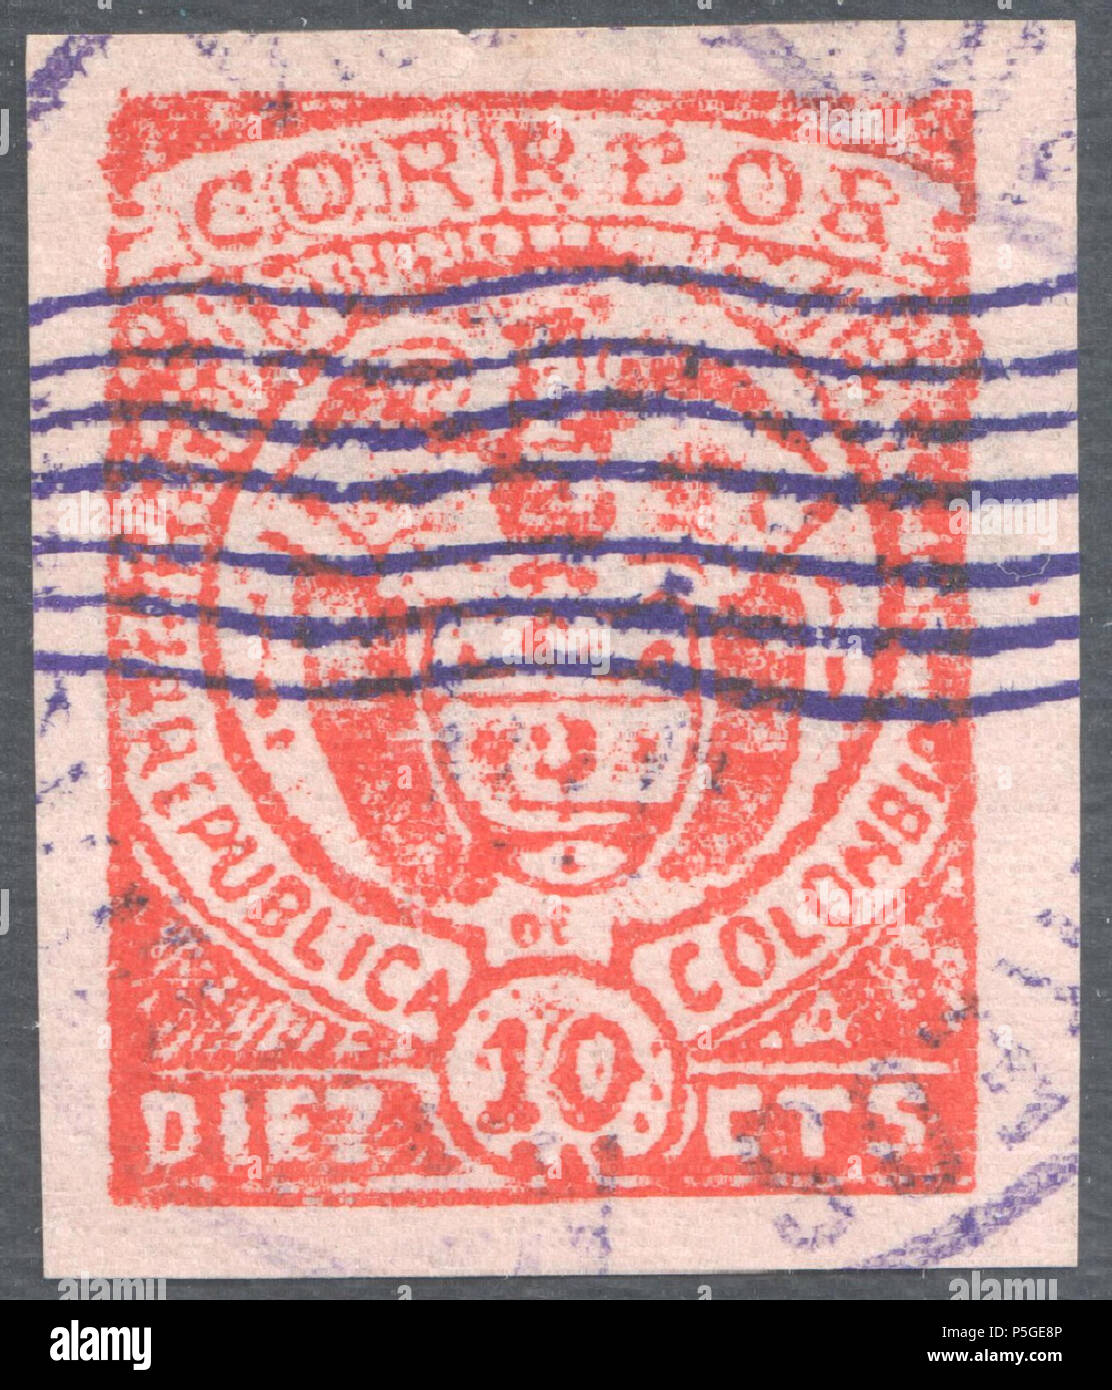 N/A. English: Colombia Cartagena 10c second issue, purple overprint, December 8. Overprinted with 7 parallel wavy lines, a control mark to identify stamps as national provisional issue. Catalogue: Sc. 173 . 8 December 1899. Post of Colombia 368 Colombia Cartagena 1899 Sc173 Stock Photo